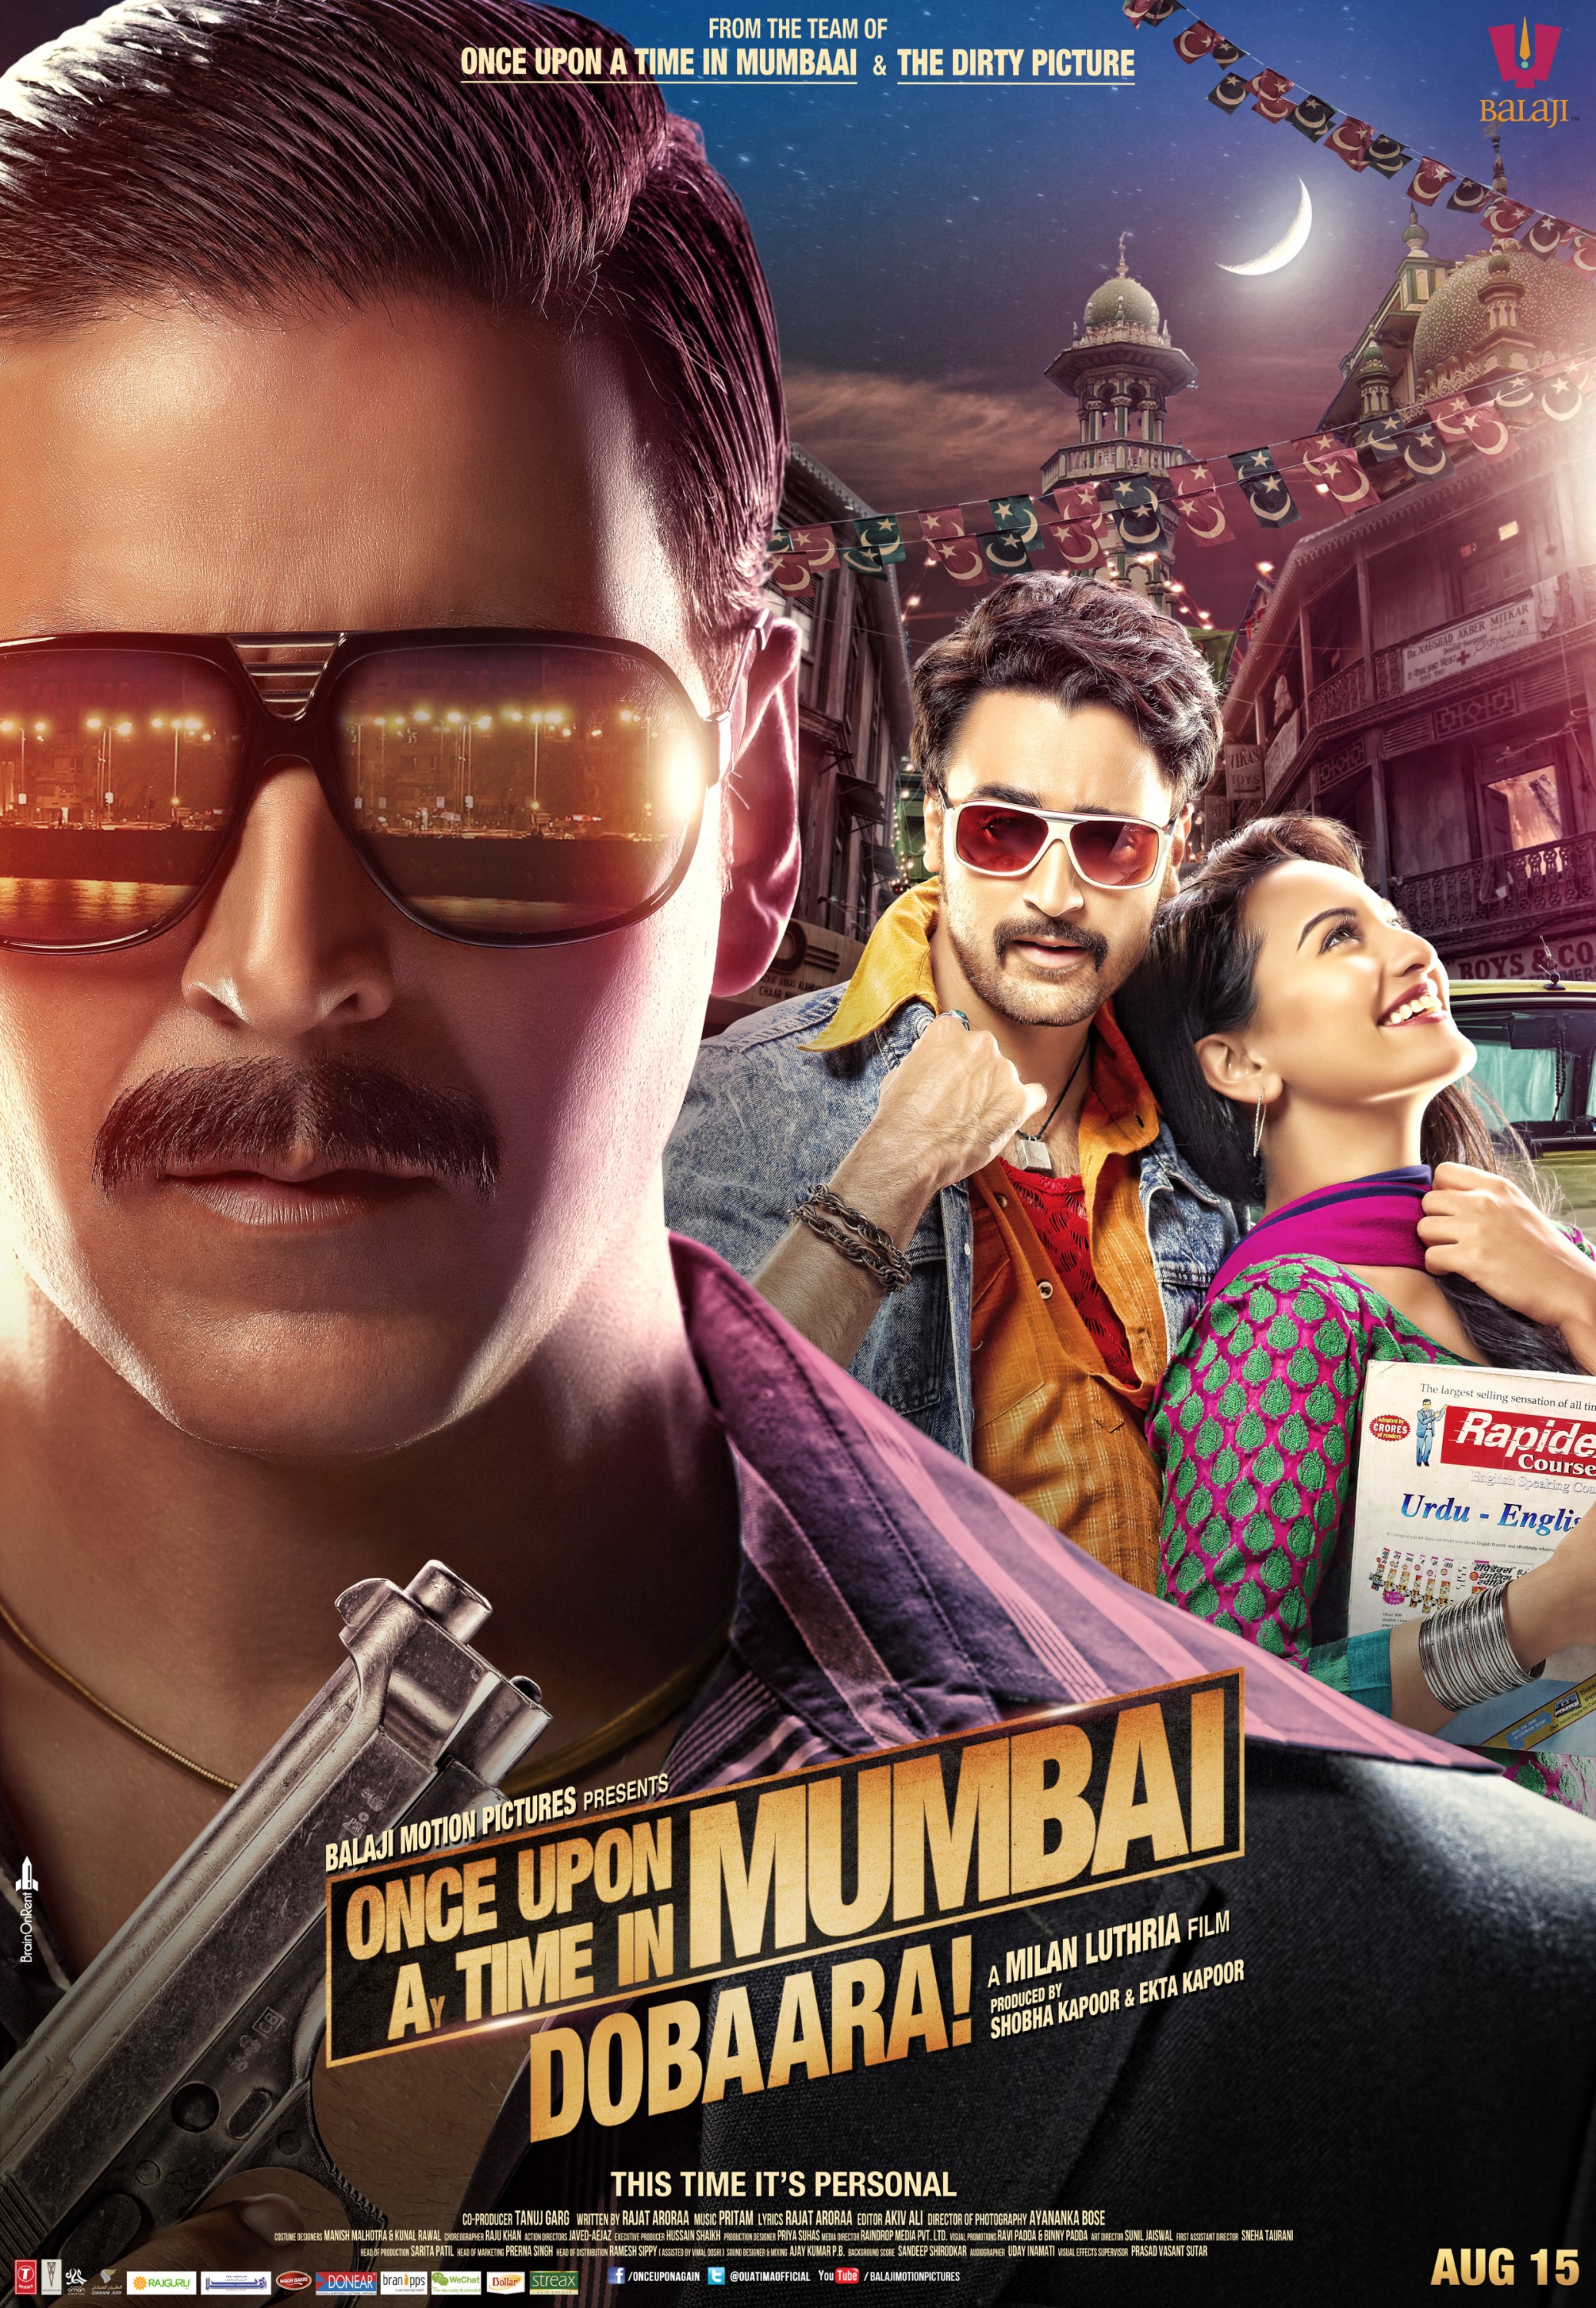 Mega Sized Movie Poster Image for Once Upon a Time in Mumbai Dobaara! (#7 of 11)